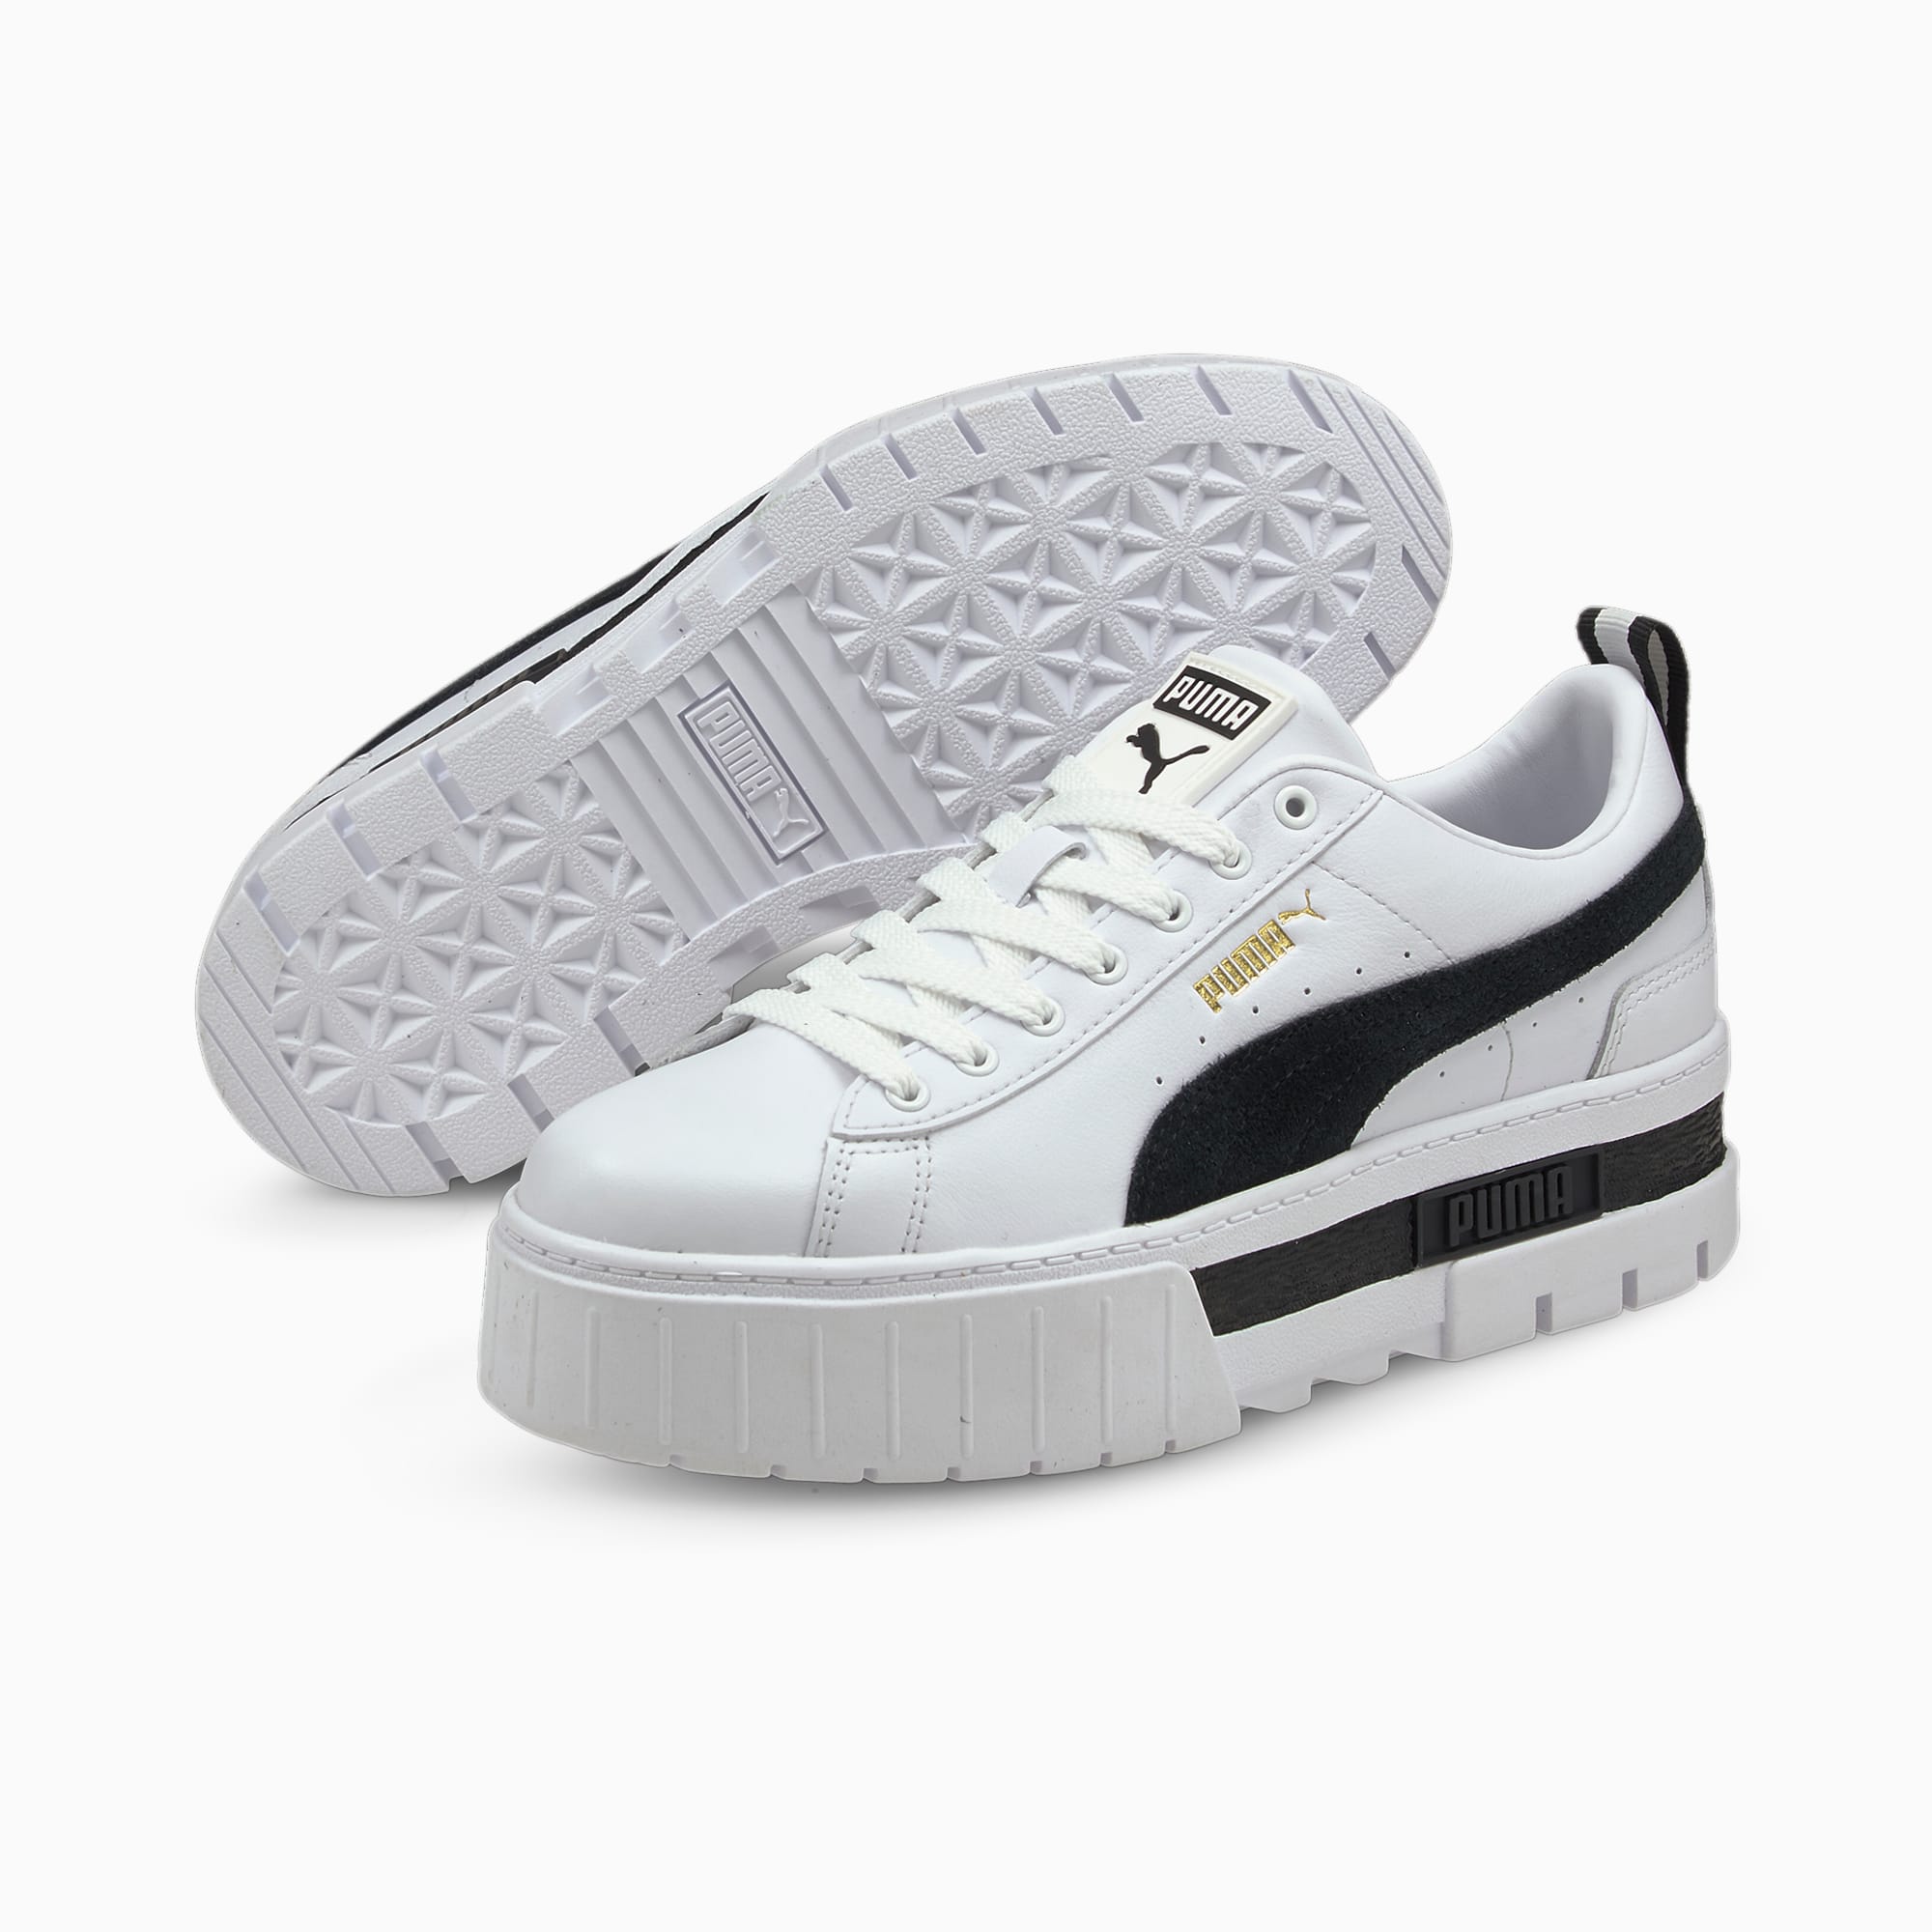 PUMA Mayze platform sneakers in white and beige